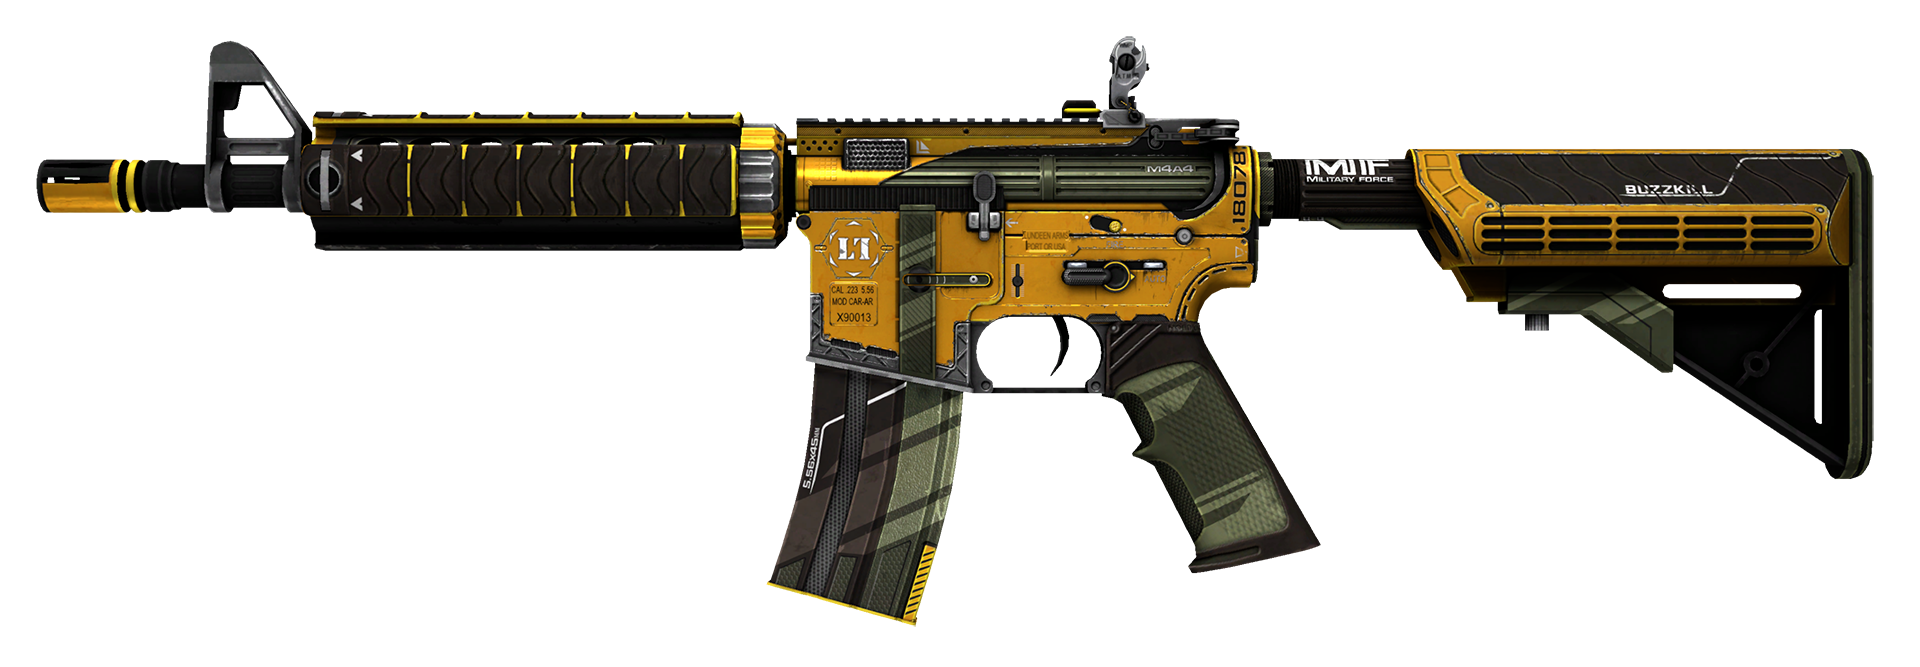 M4A4 Buzz Kill Large Rendering